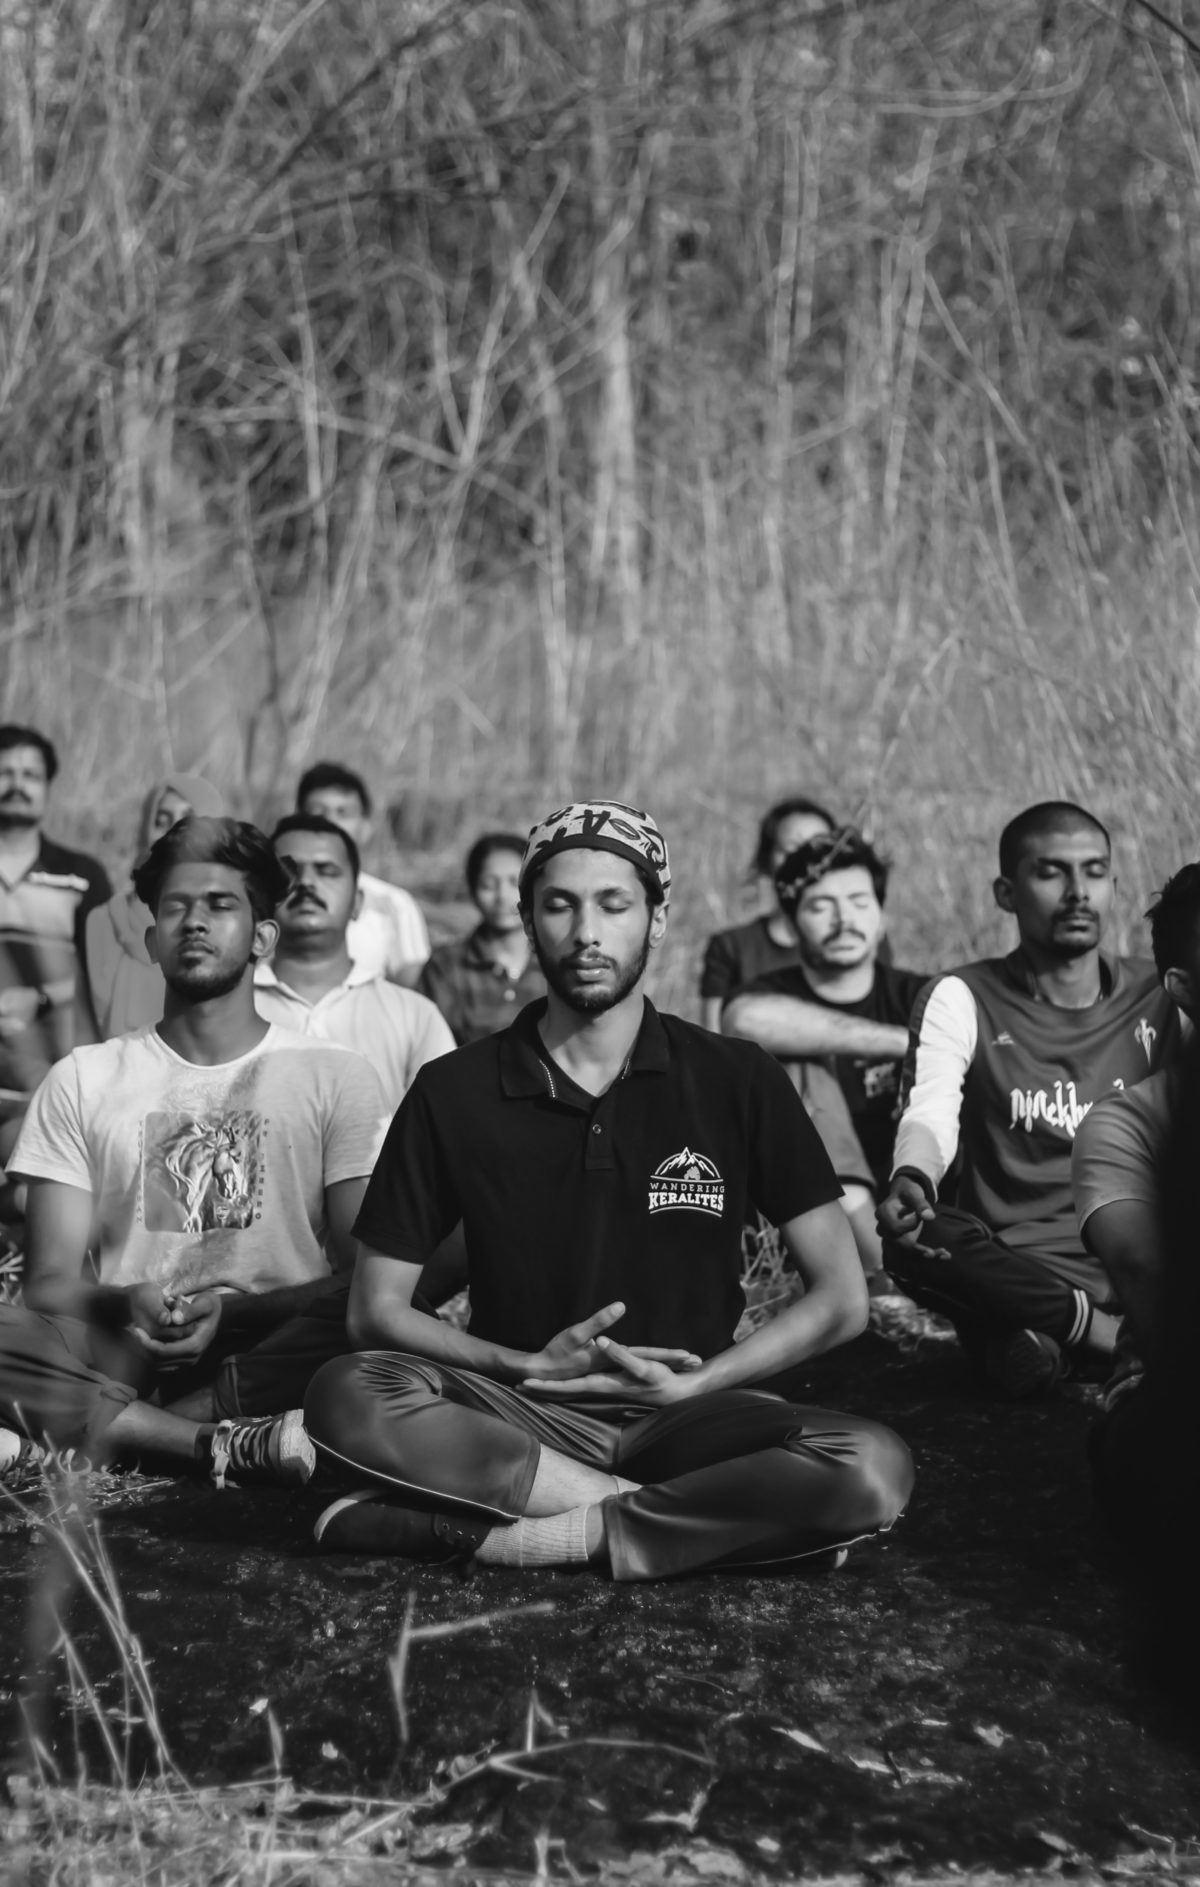 group of men be conscious and present together meditating in front of long grass